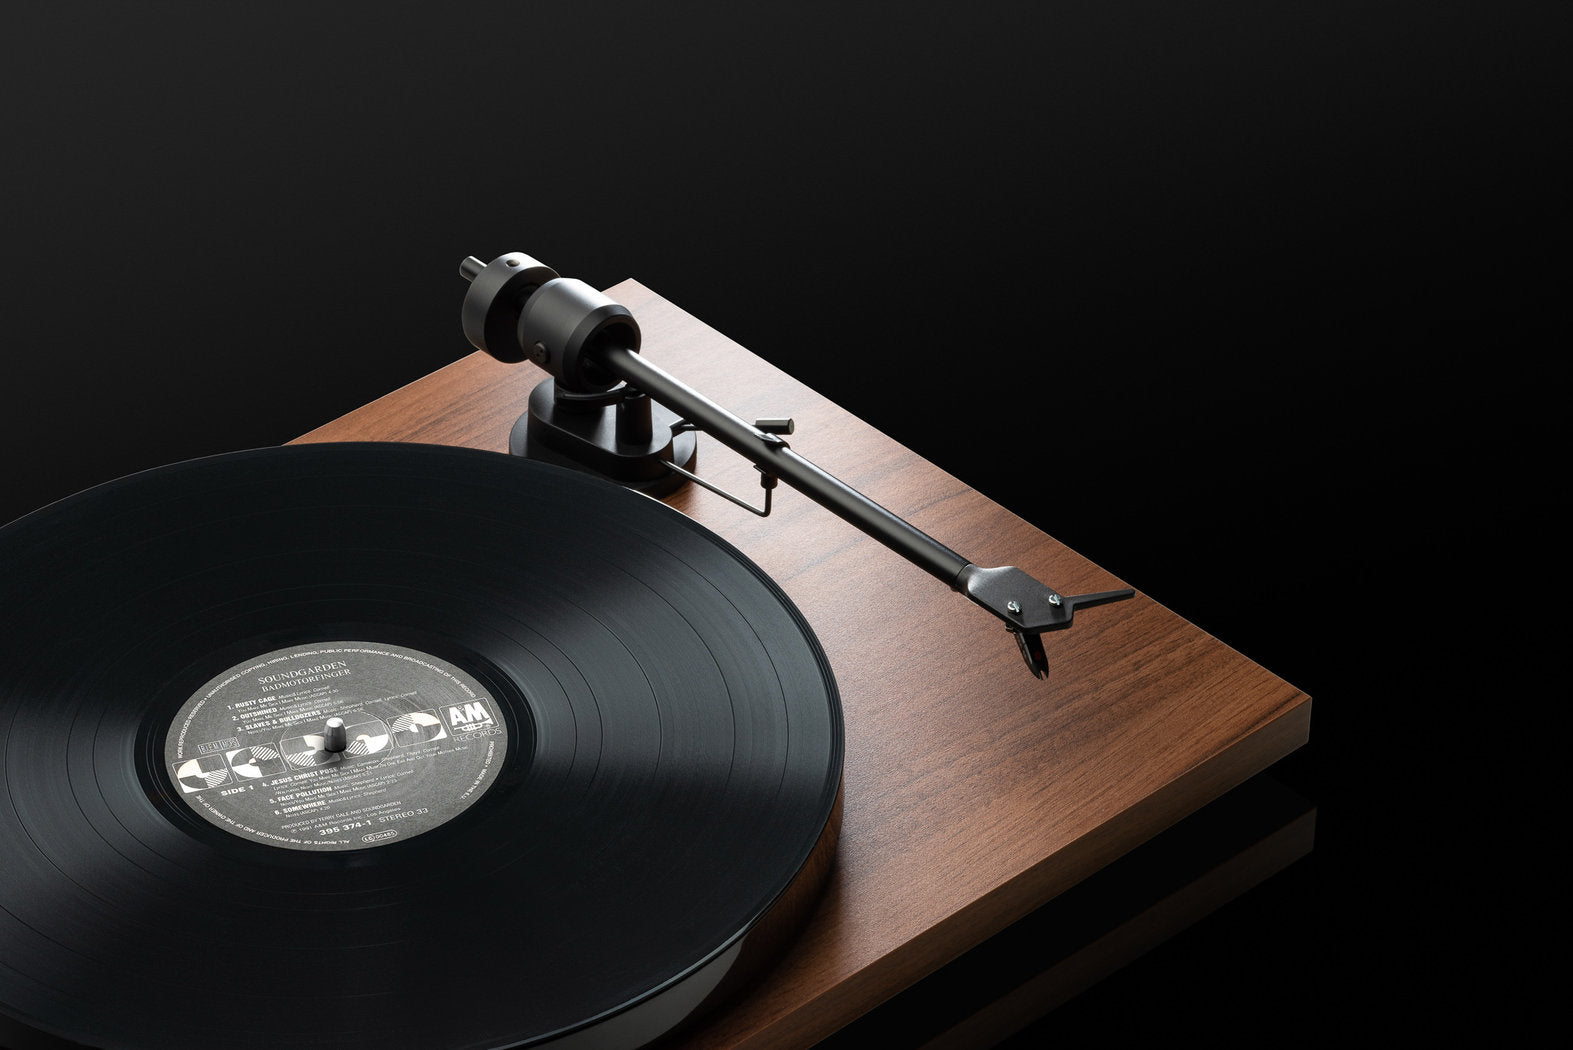 Pro-Ject E1 BT turntable